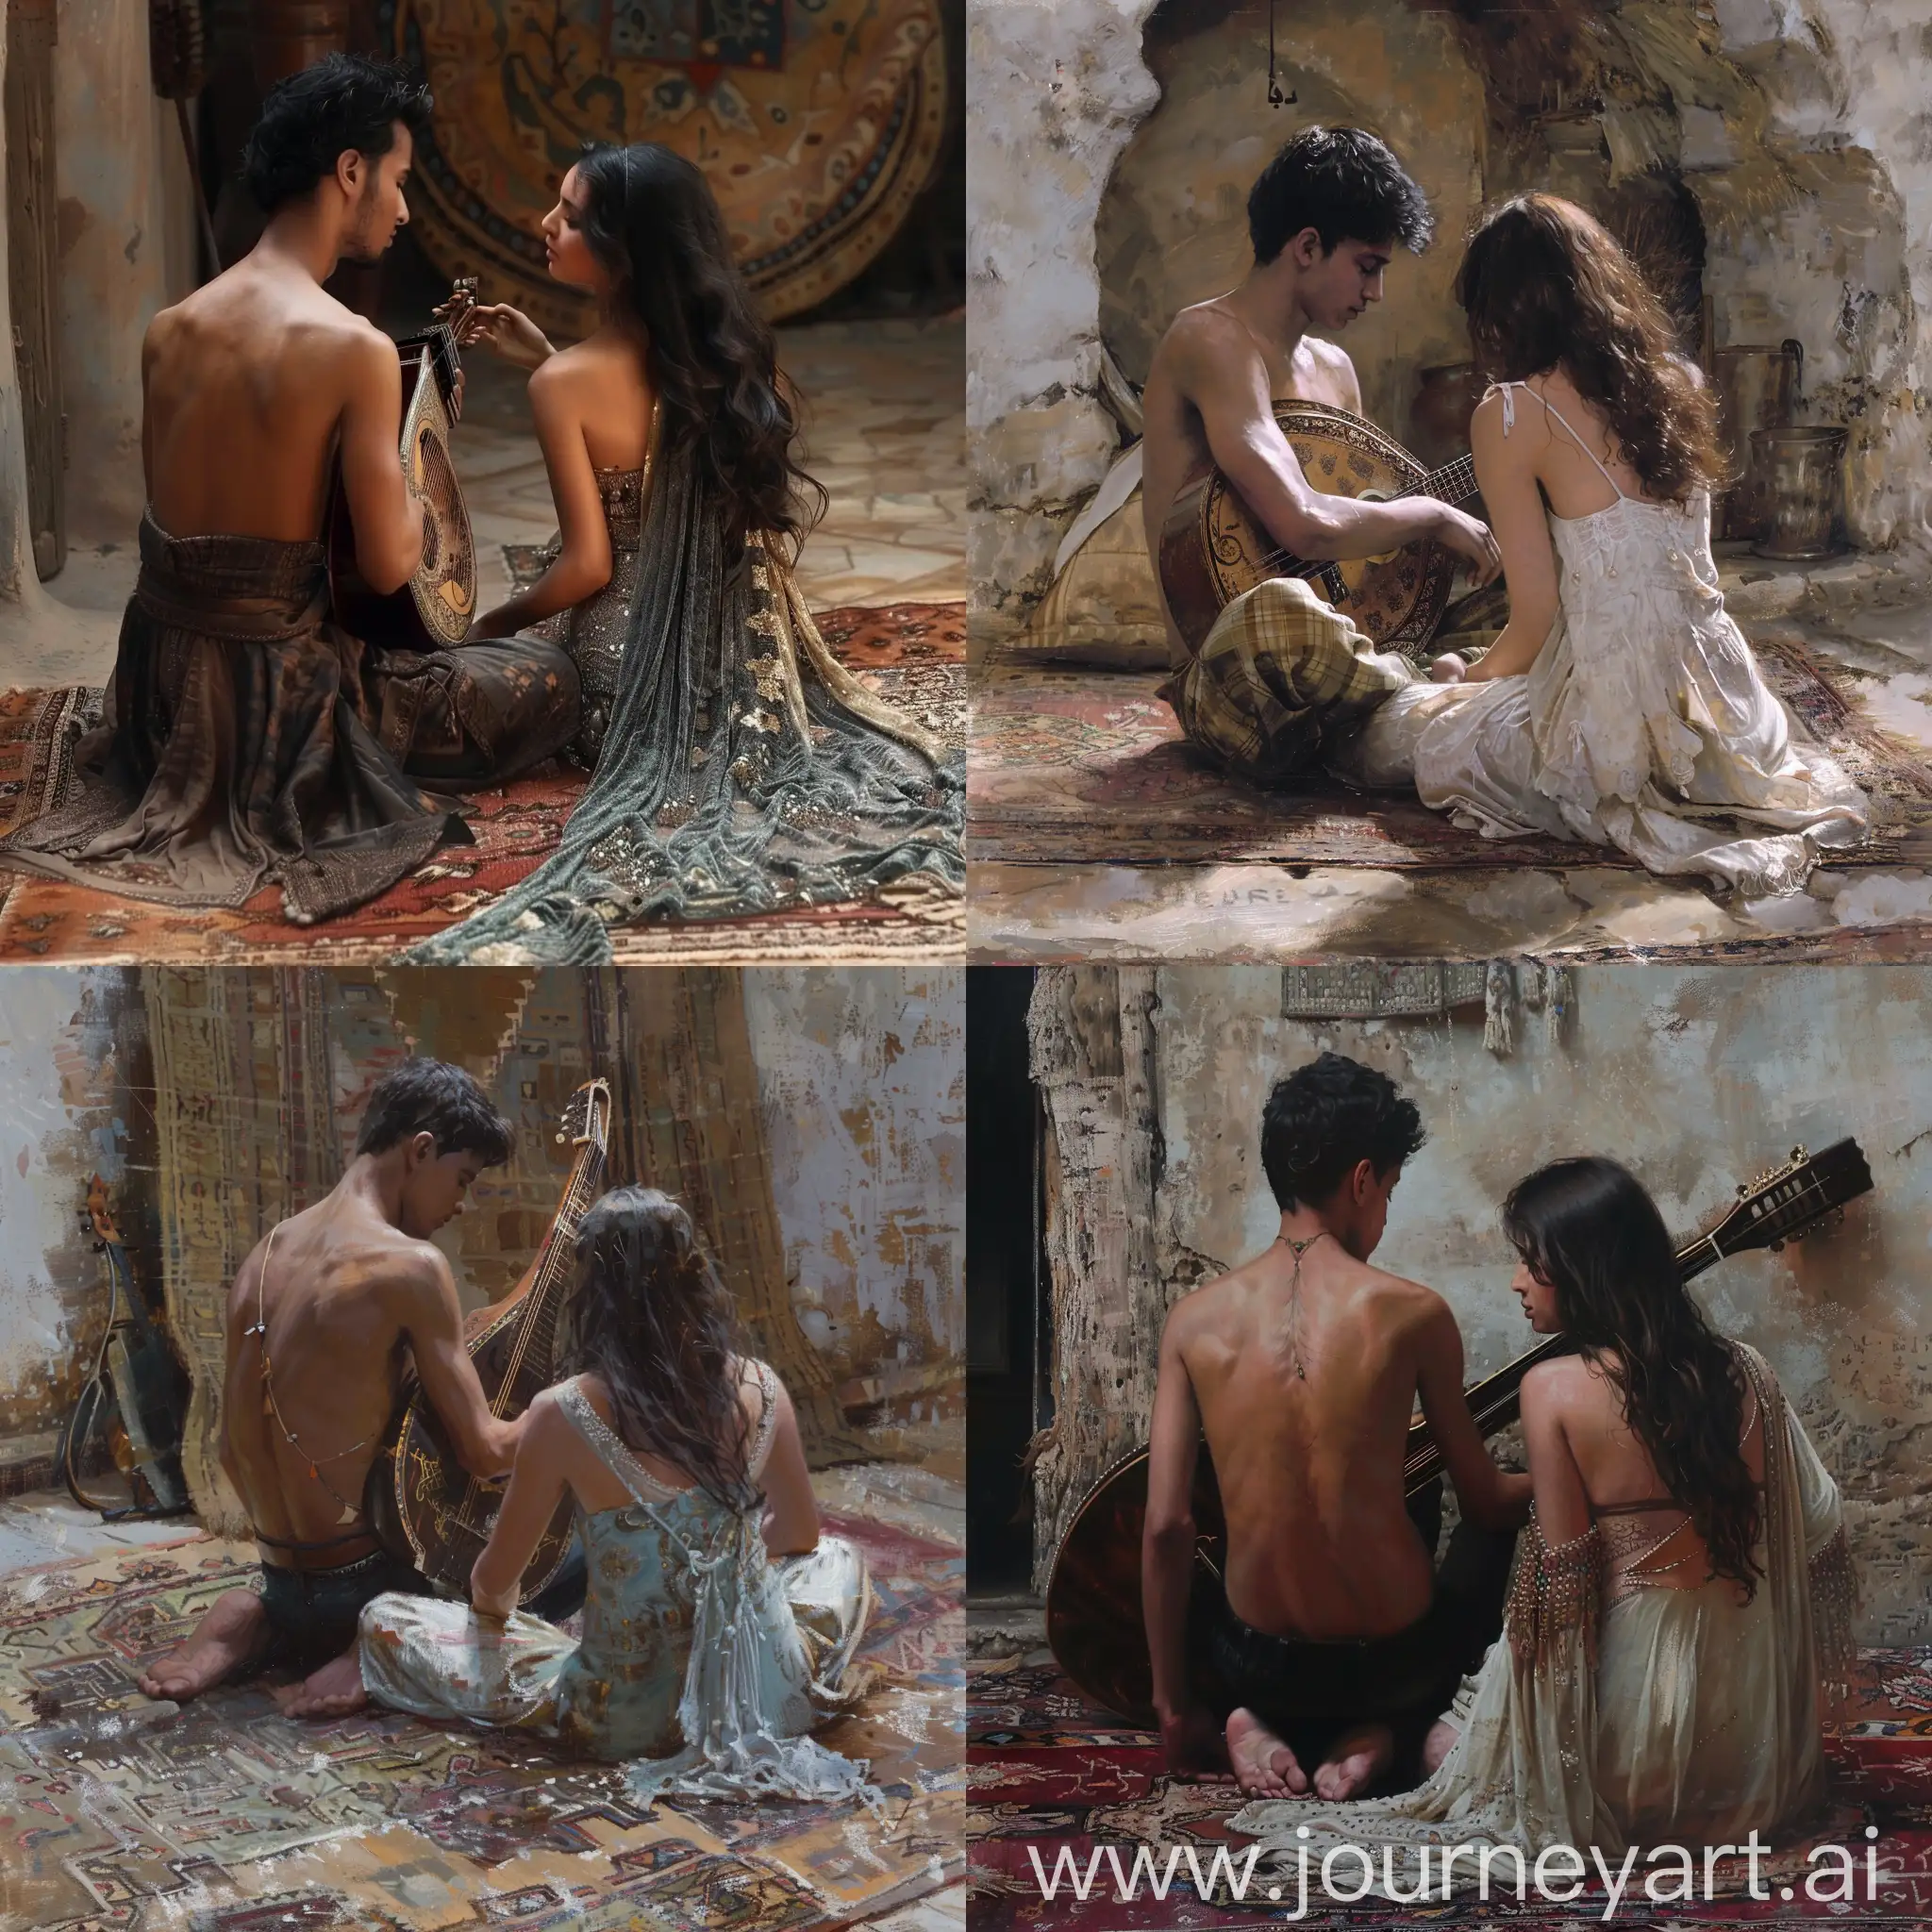 Rear side view: A dark-skinned Saudi young man, with a thin, tall body, sits cross-legged on the floor, hugging the oud, and playing a beautiful song. A beautiful young woman sits in front of him and looks at him intently. They seem to be sitting on a rug in an old mud room.